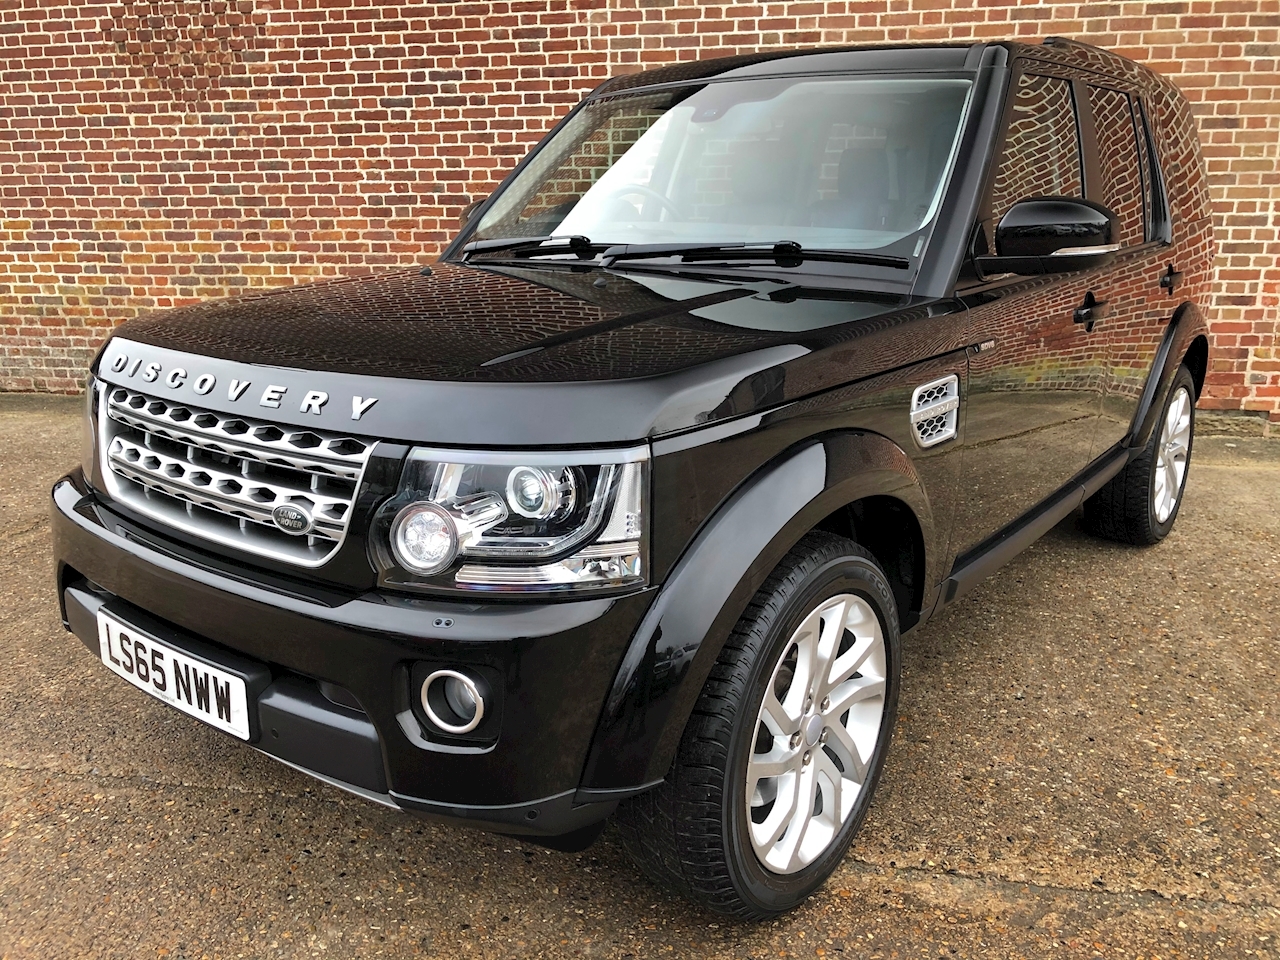 Used 2015 LAND ROVER DISCOVERY 4 AUTOMATIC DIESEL for Sale BG402276  BE  FORWARD